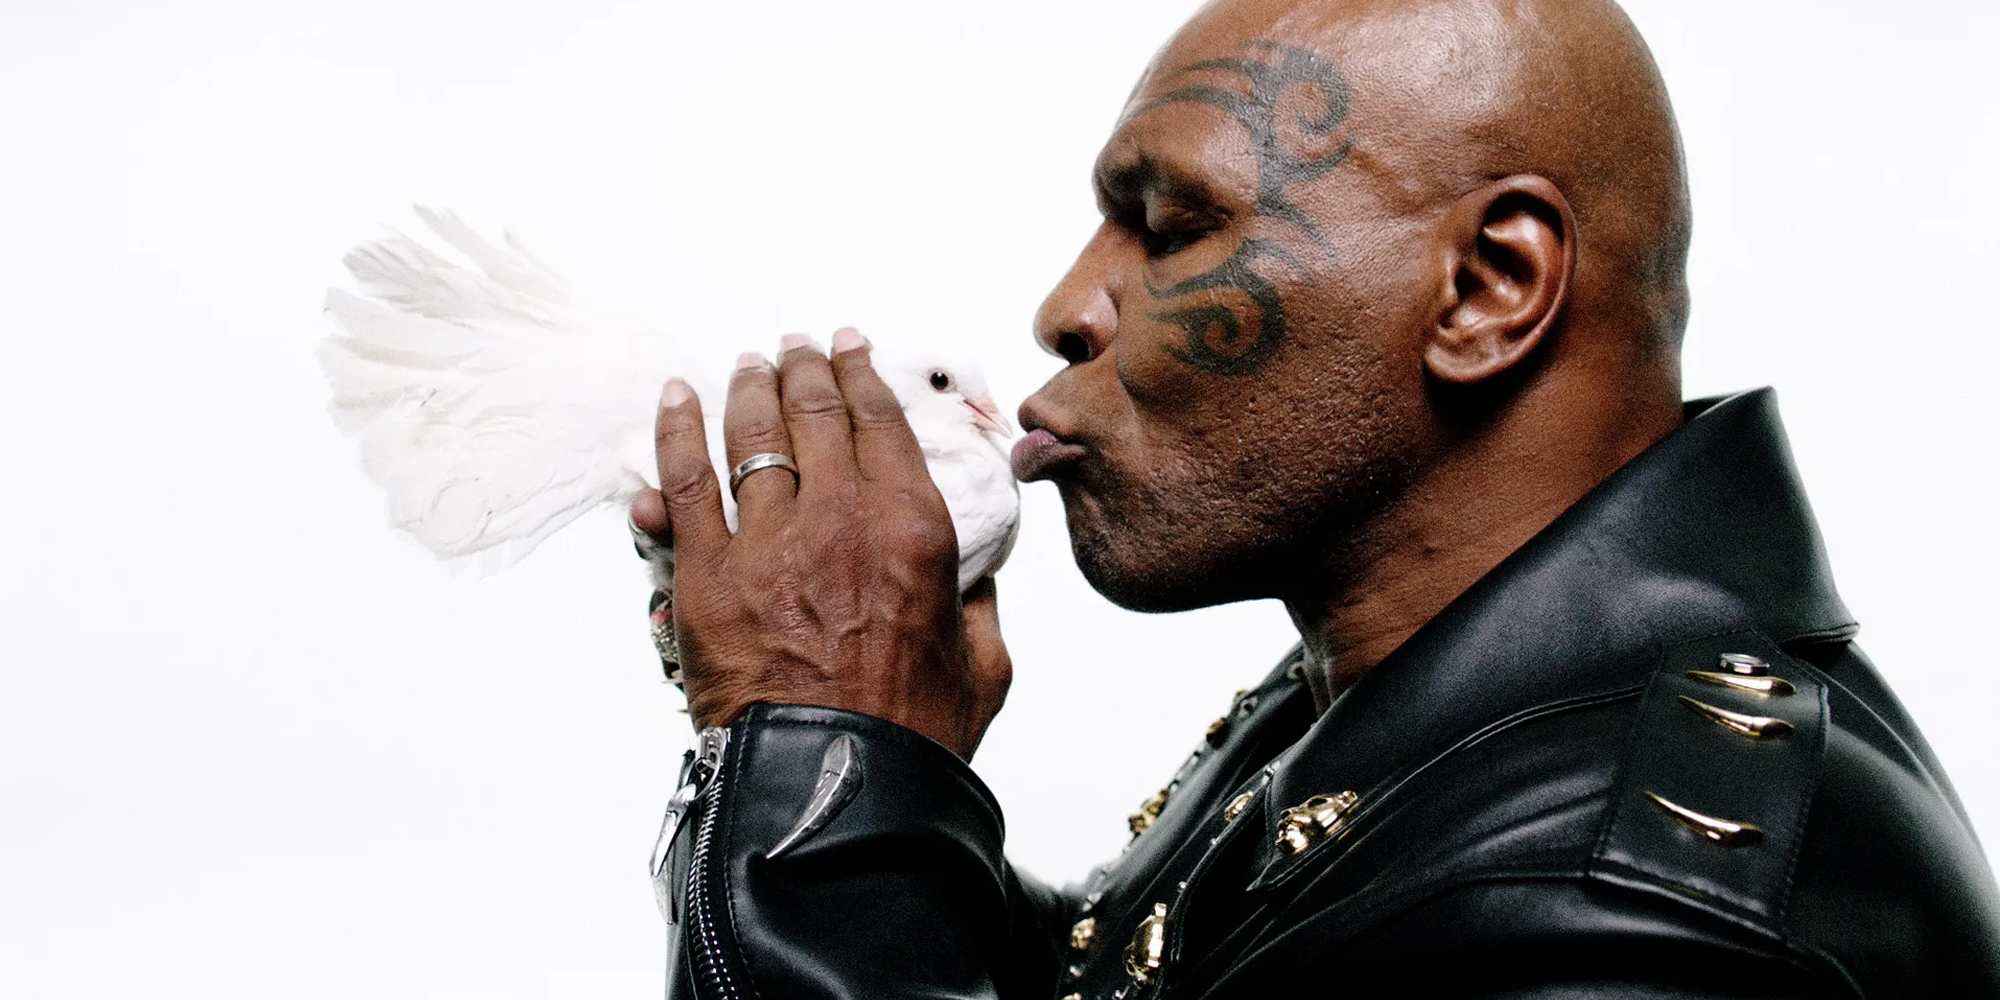 ROBERTO CAVALLI SPRING 2022 COLLECTION FILM STARRING MIKE TYSON